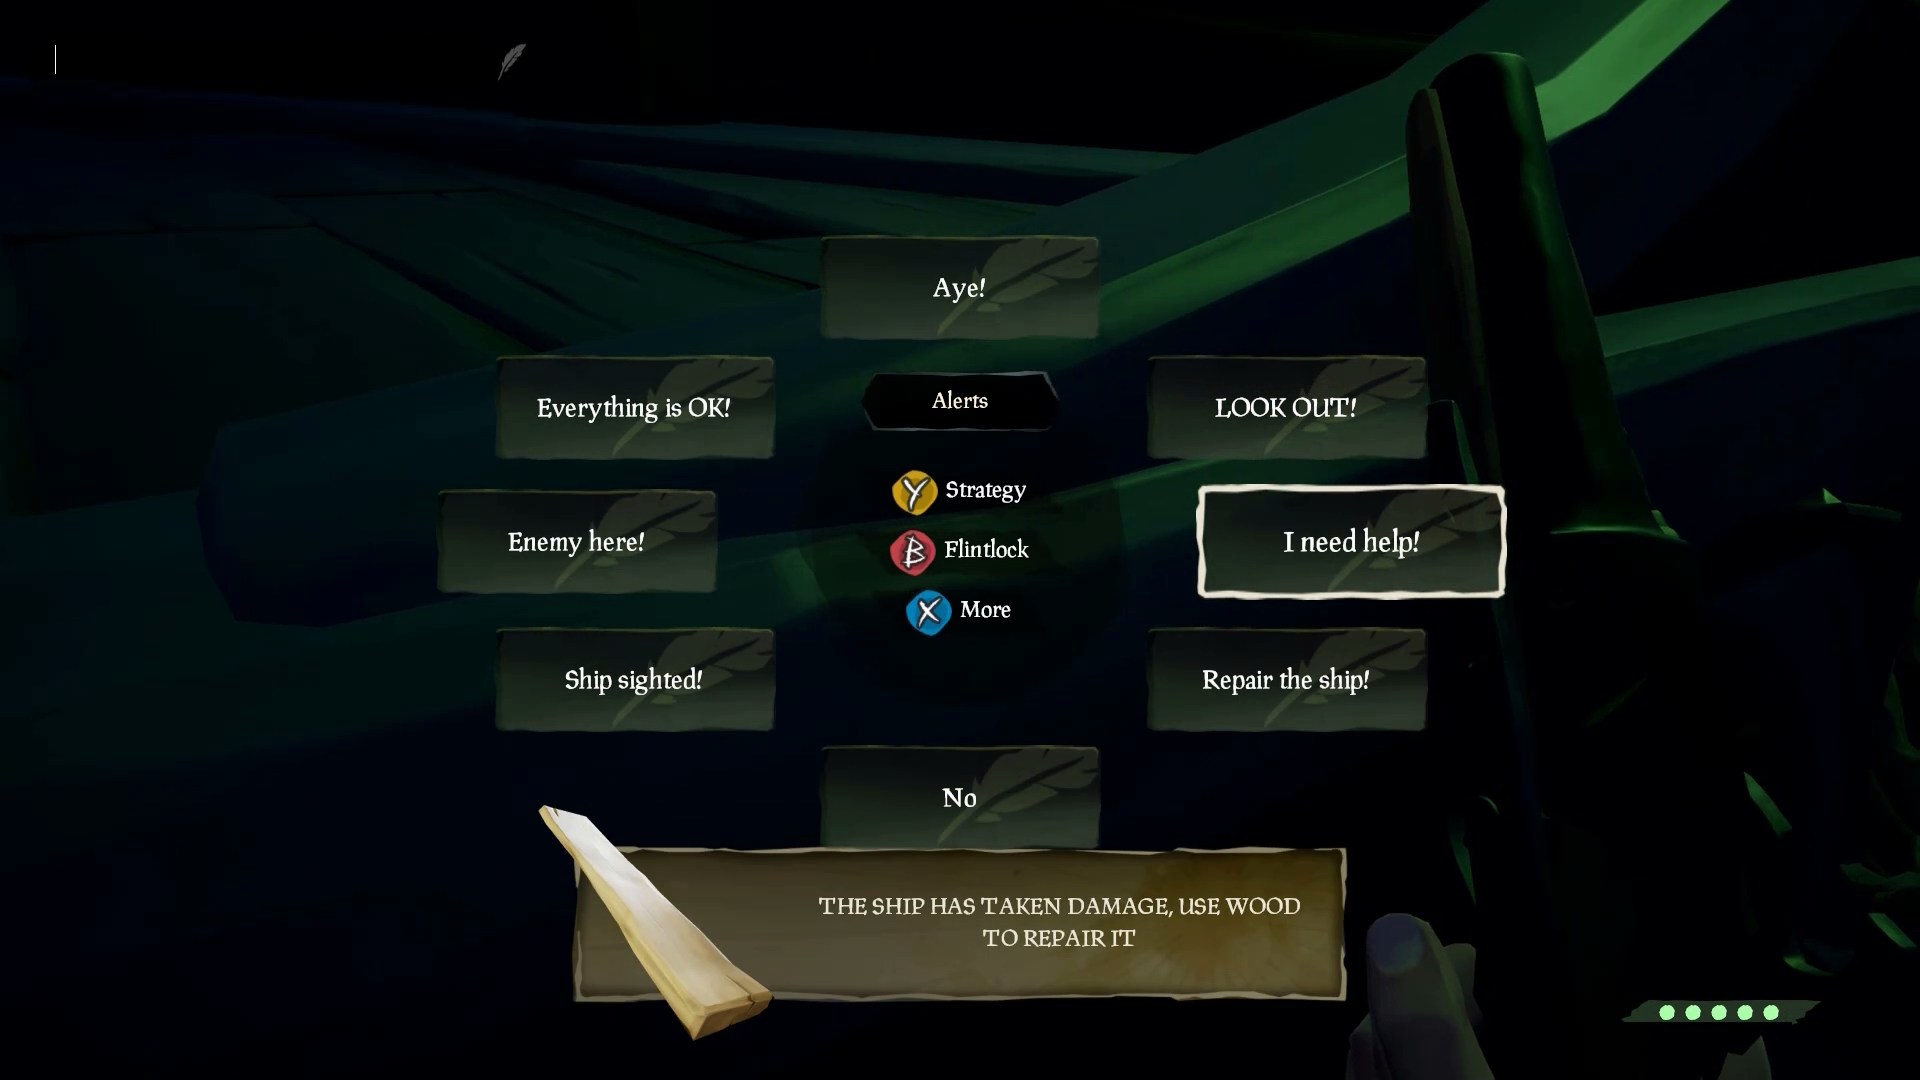 A screenshot from Sea of Thieves. The chat wheel is displayed with "I need help!" selected.